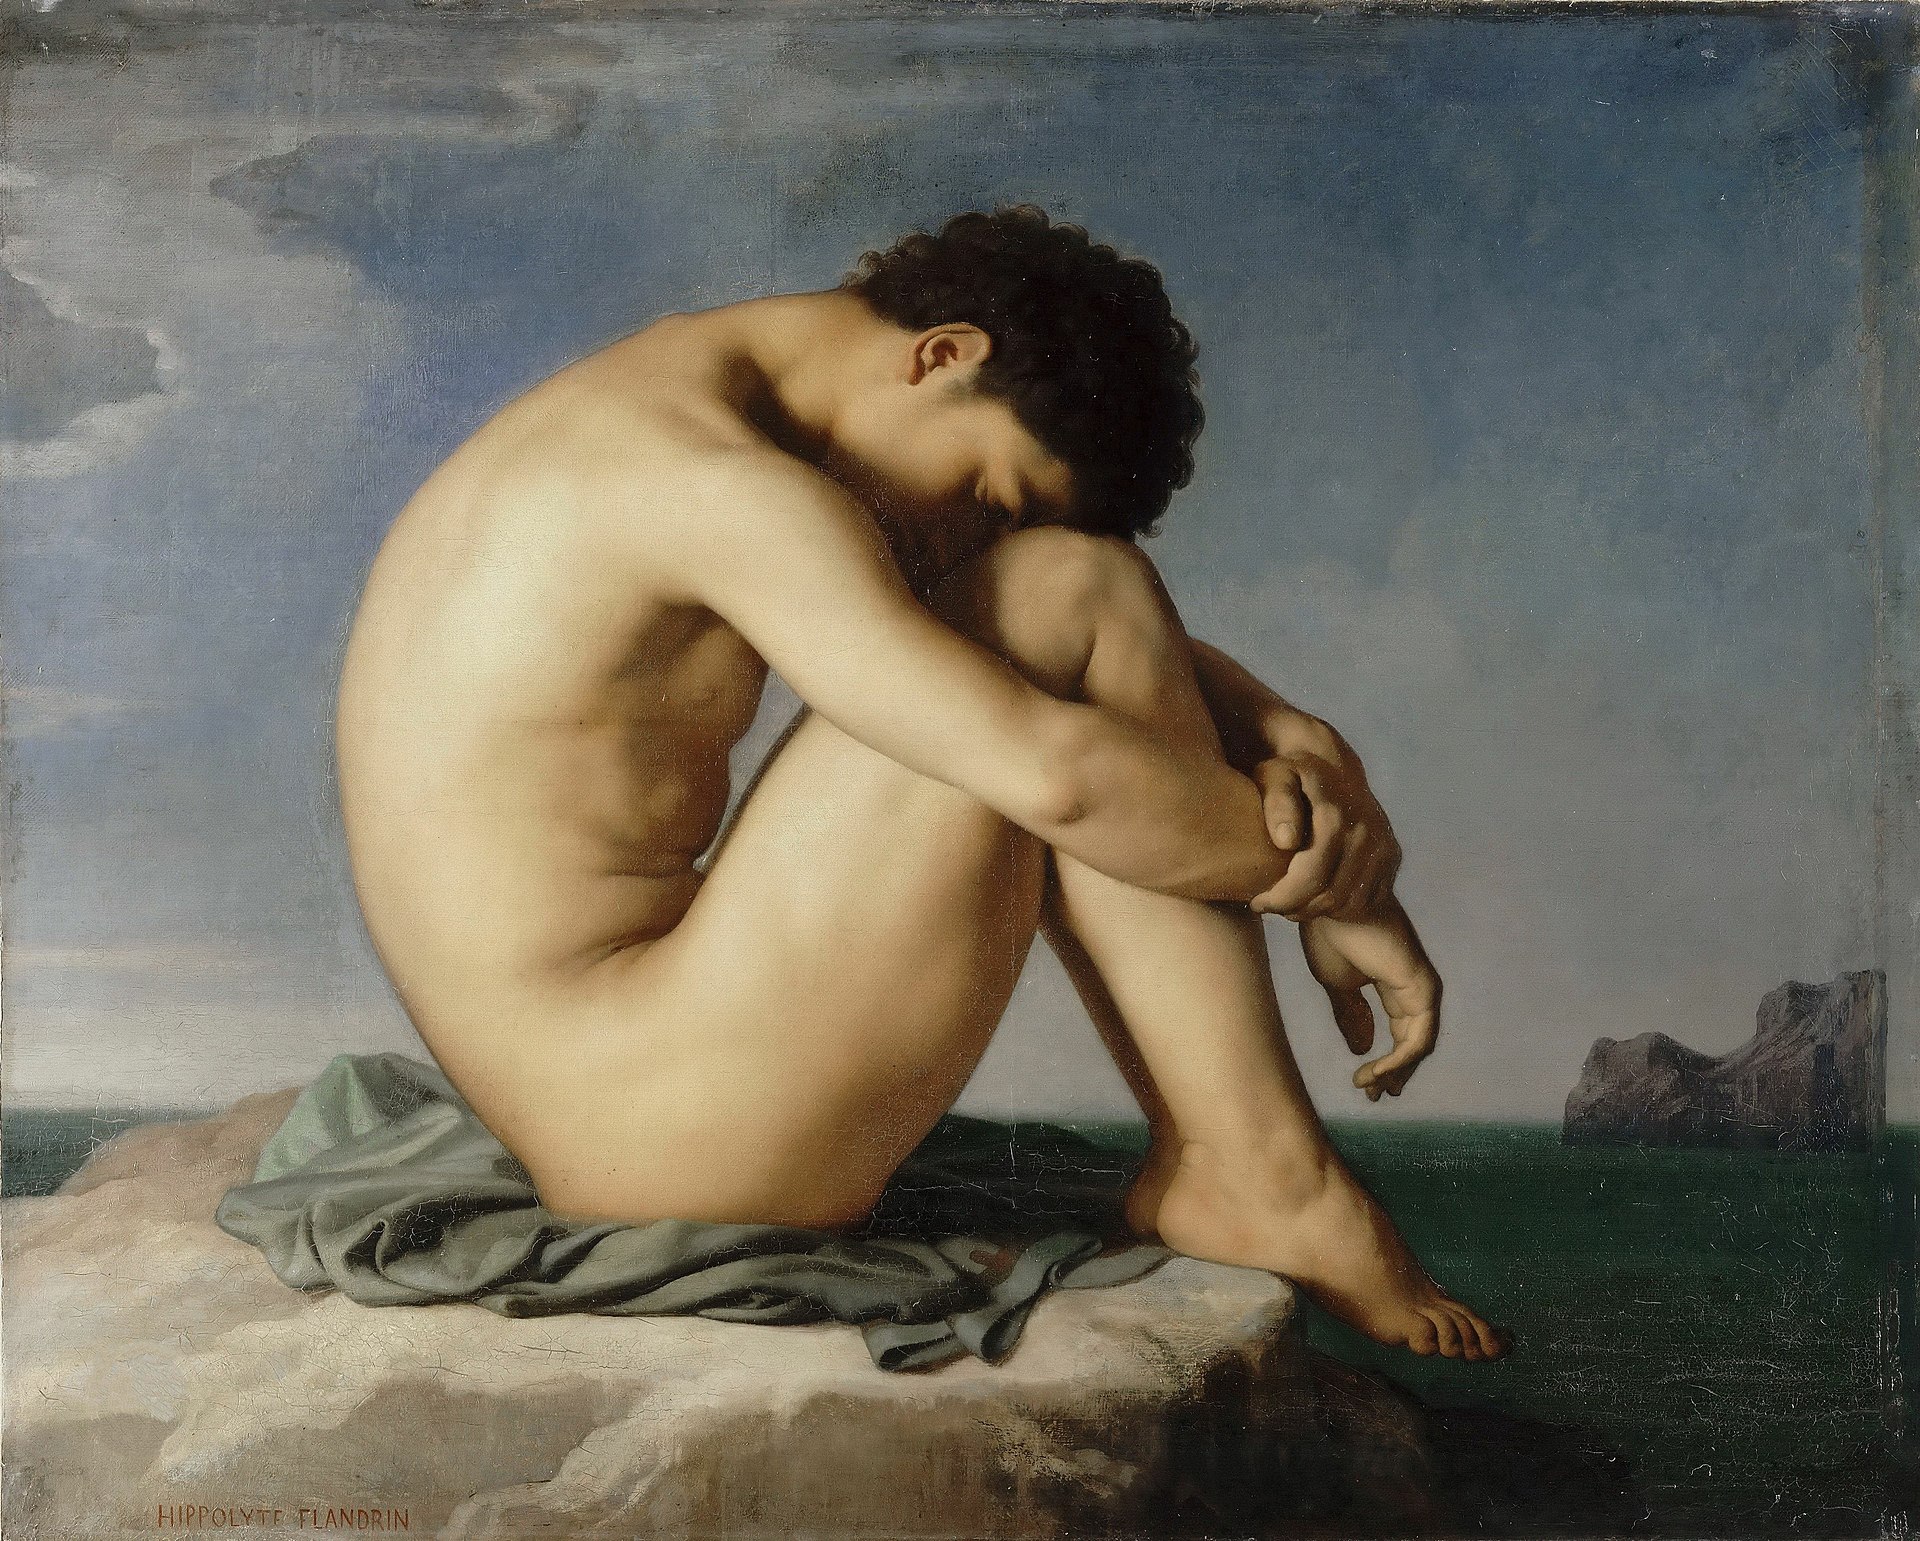 Male nudes in art: Jean-Hippolyte Flandrin, Study, Young Male Nude Seated beside the Sea, 1836, Musée du Louvre, Paris, France.